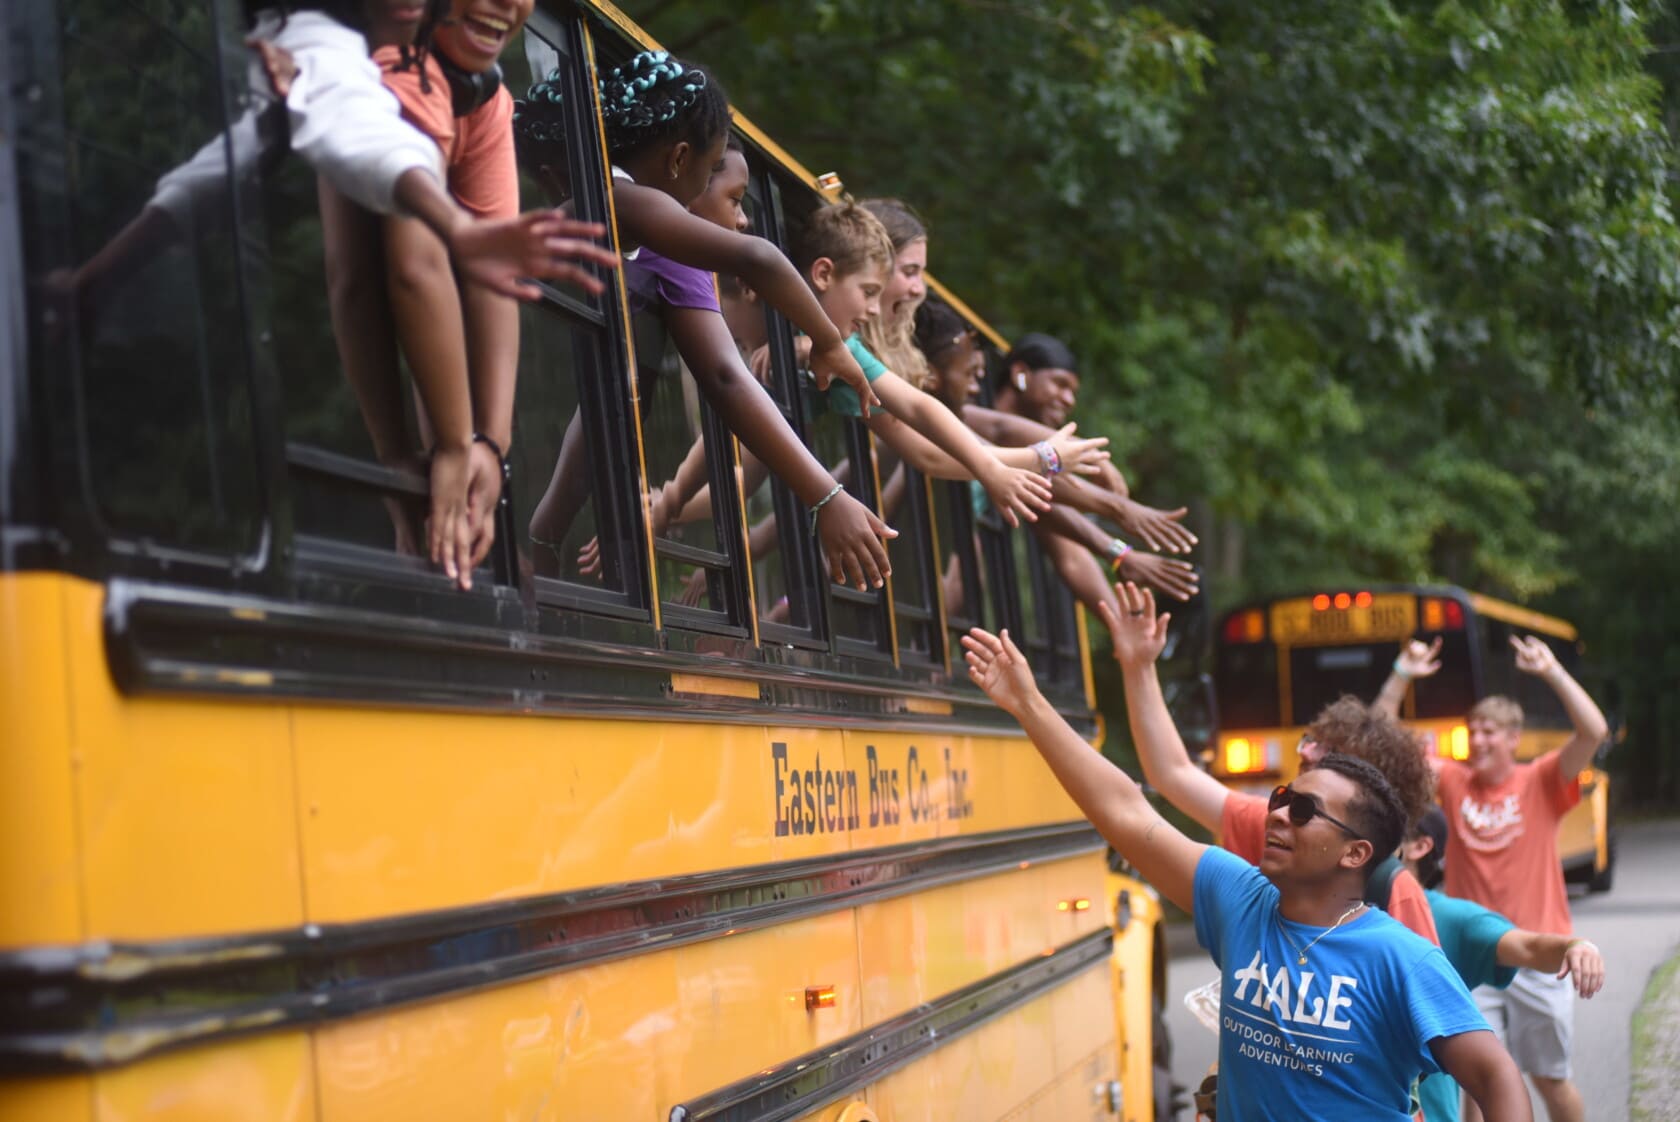 A counselor high-fives campers on a bus.